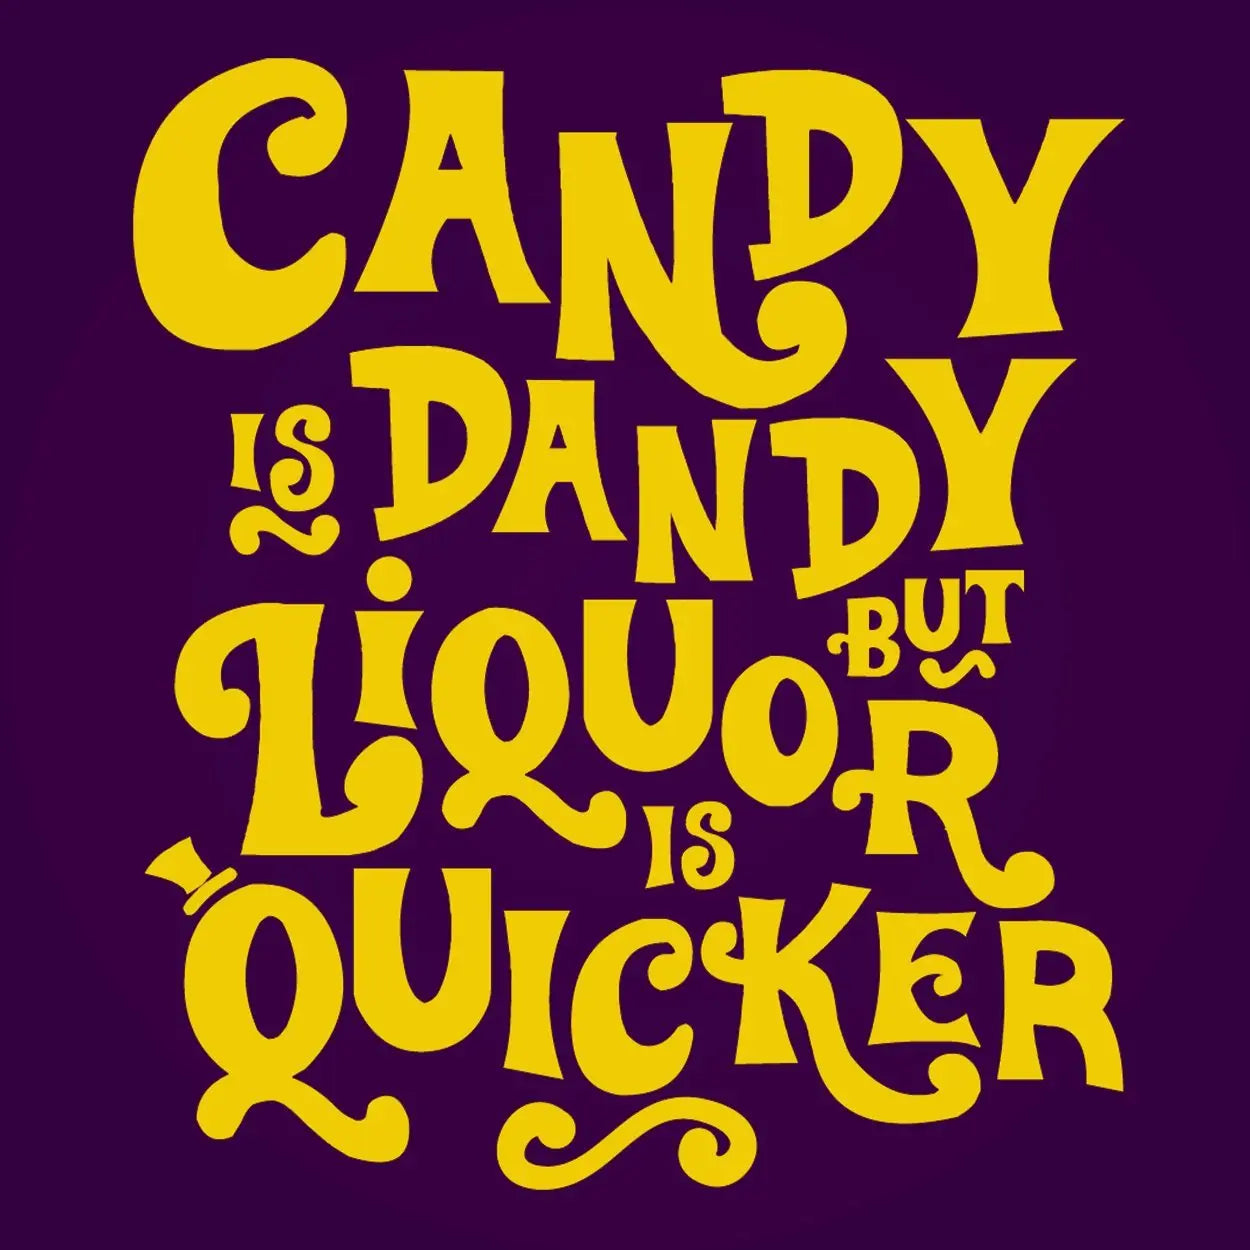 Candy Is Dandy But Liquor Is Quicker Tshirt - Donkey Tees